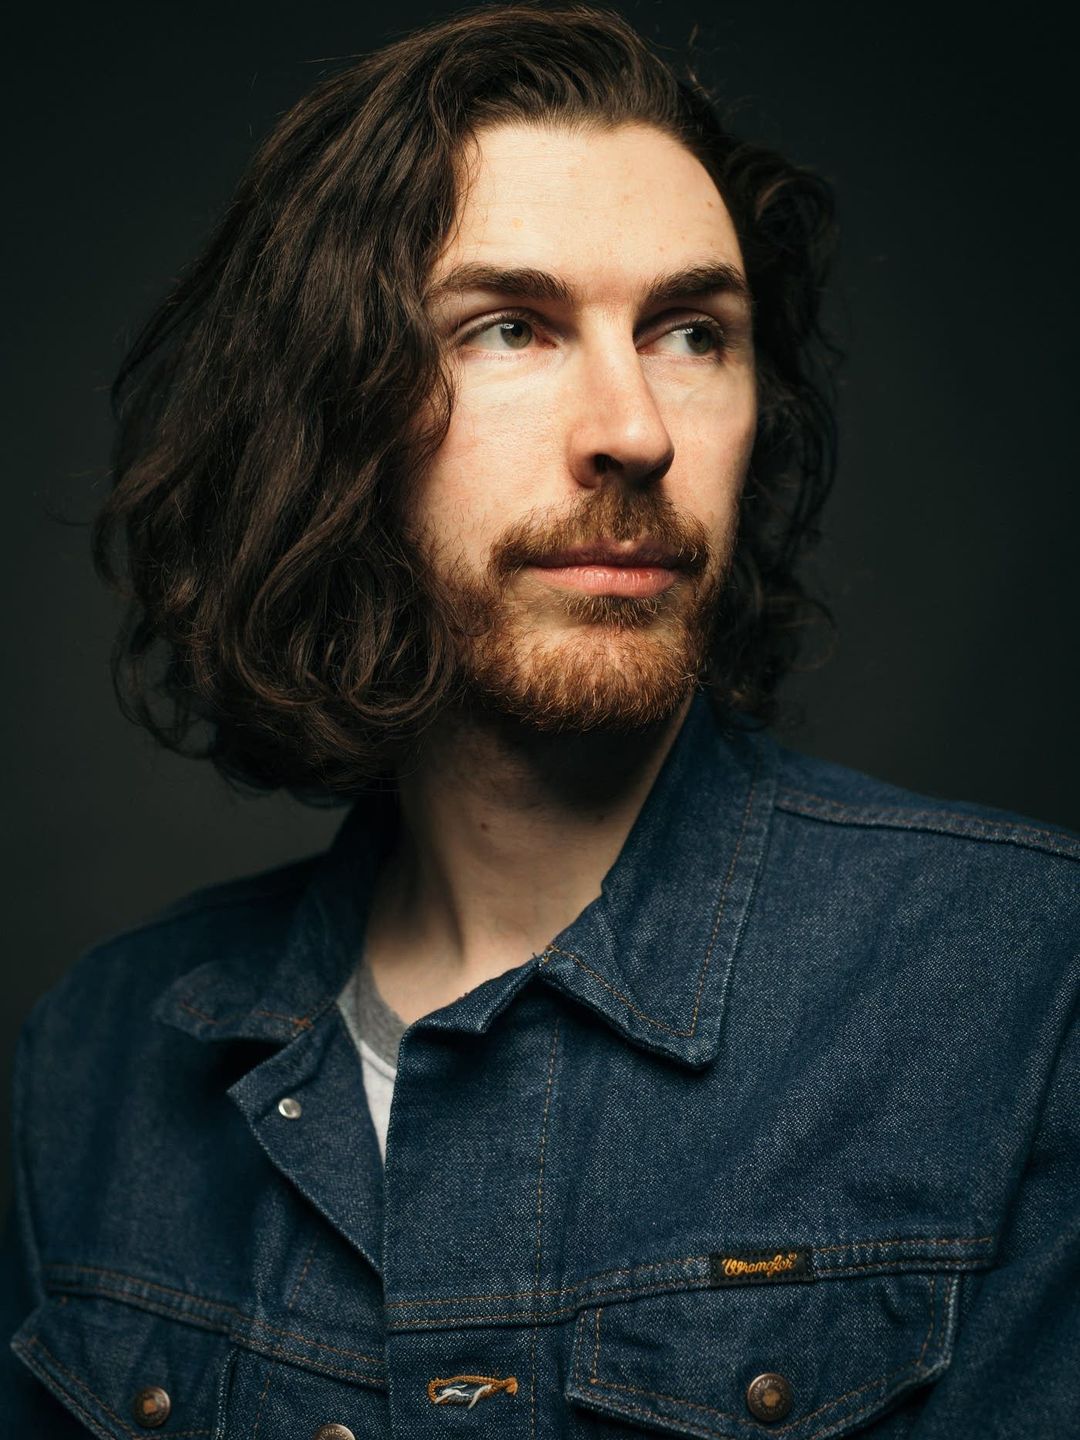 Hozier way to fame